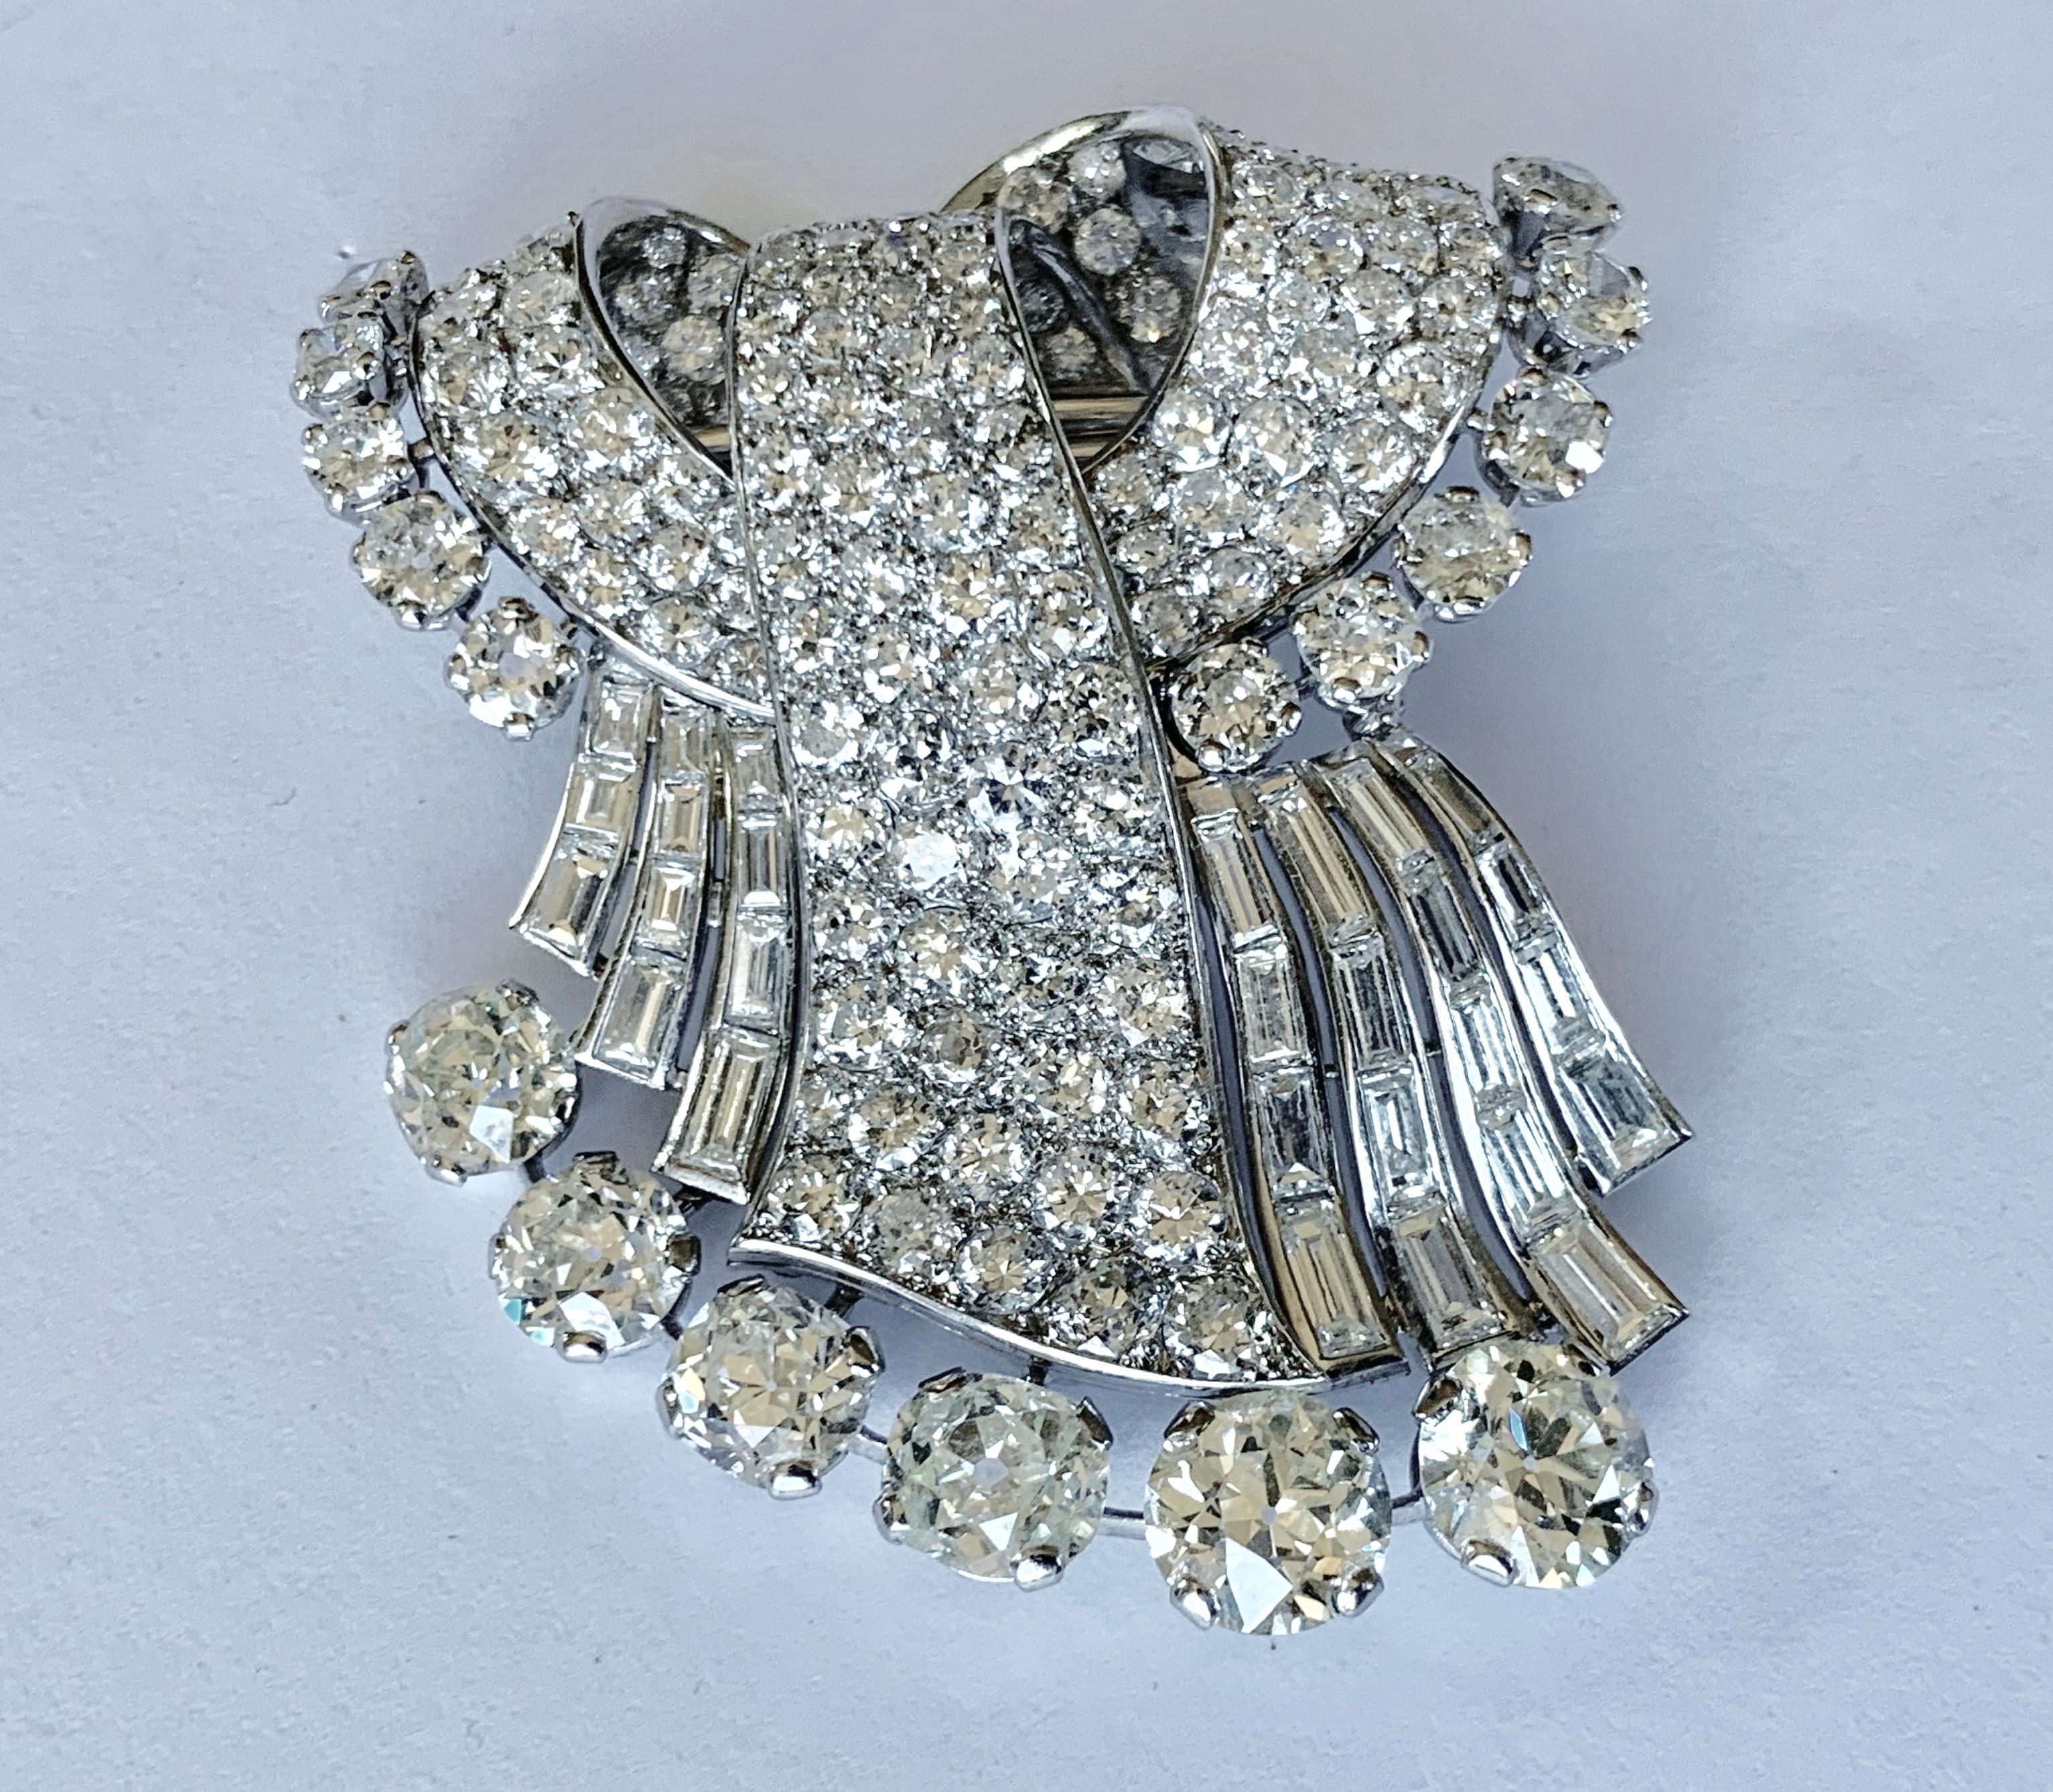 Exquisite Platinum und white gold brooch set with 6 old cut diamonds of approximately 9.00 ct, 28 Diamond baguettes of ca. 5.00 ct, 11 old european cut Diamonds of ca. 3.00 ct, and 129 pave set diamonds of ca. 10.00 ct. 
Dimensions ca. 5,8 x 4,9 cm.